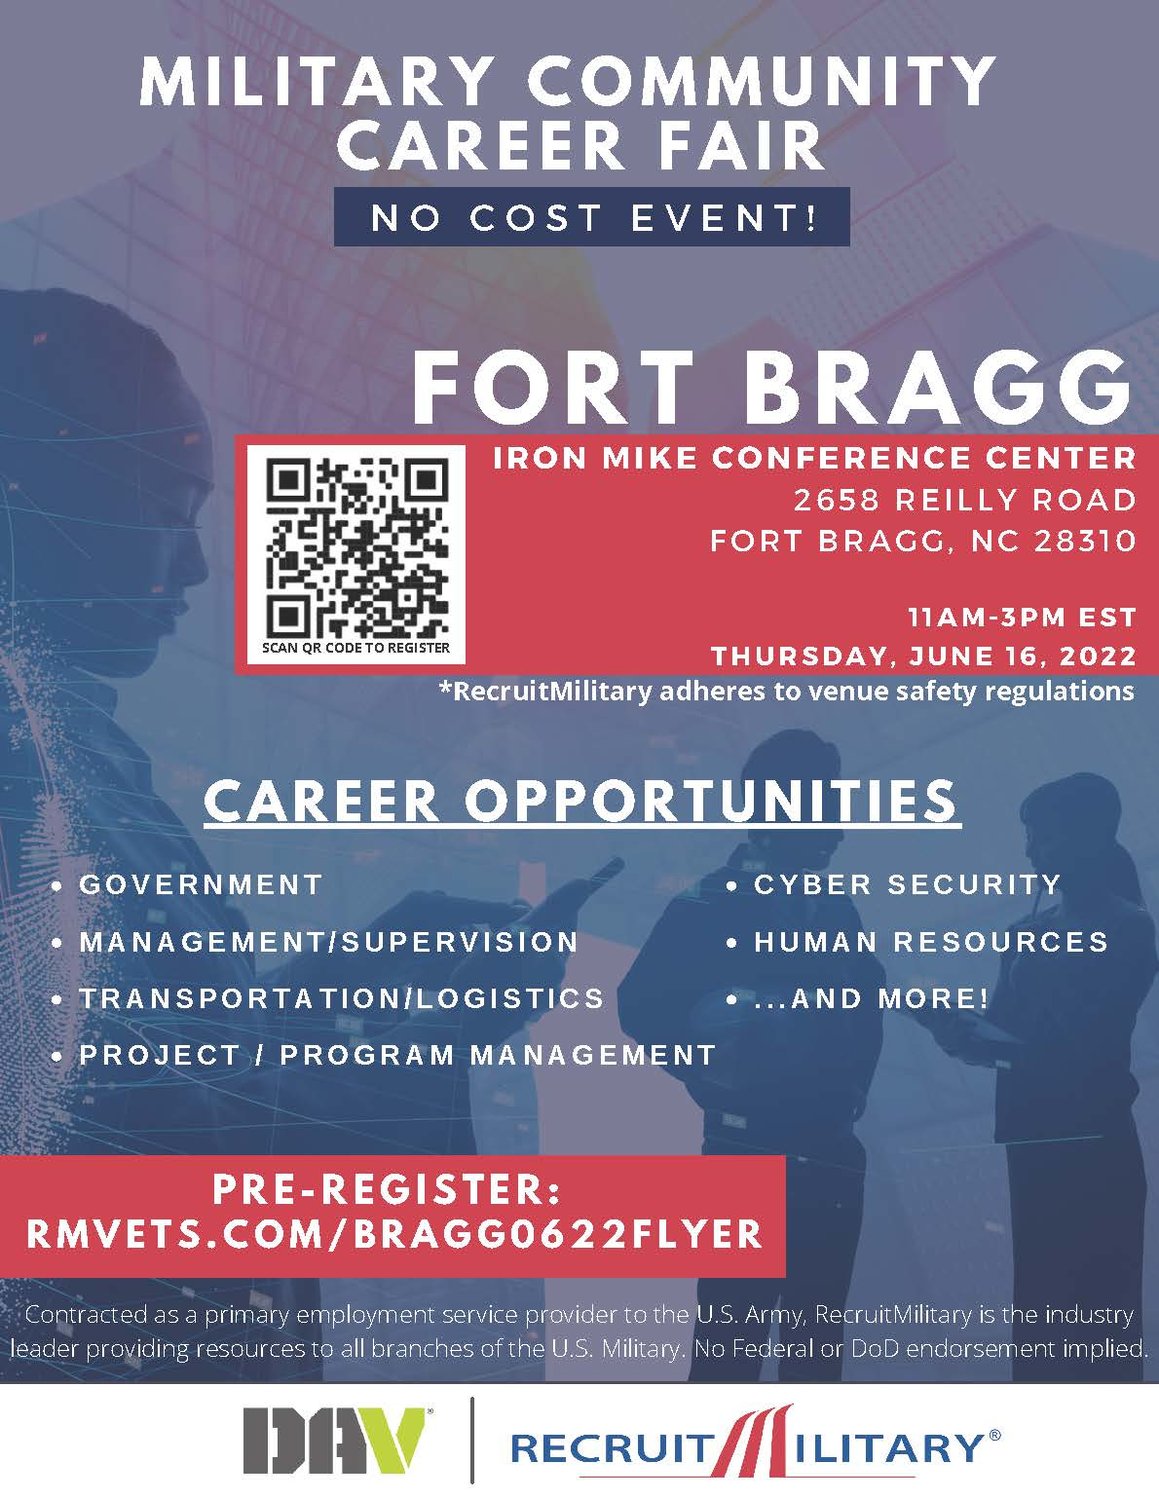 RecruitMilitary is planning an in-person hiring event on June 16 from 11 a.m. to 3 p.m. at the Iron Mike Conference Center on Fort Bragg.